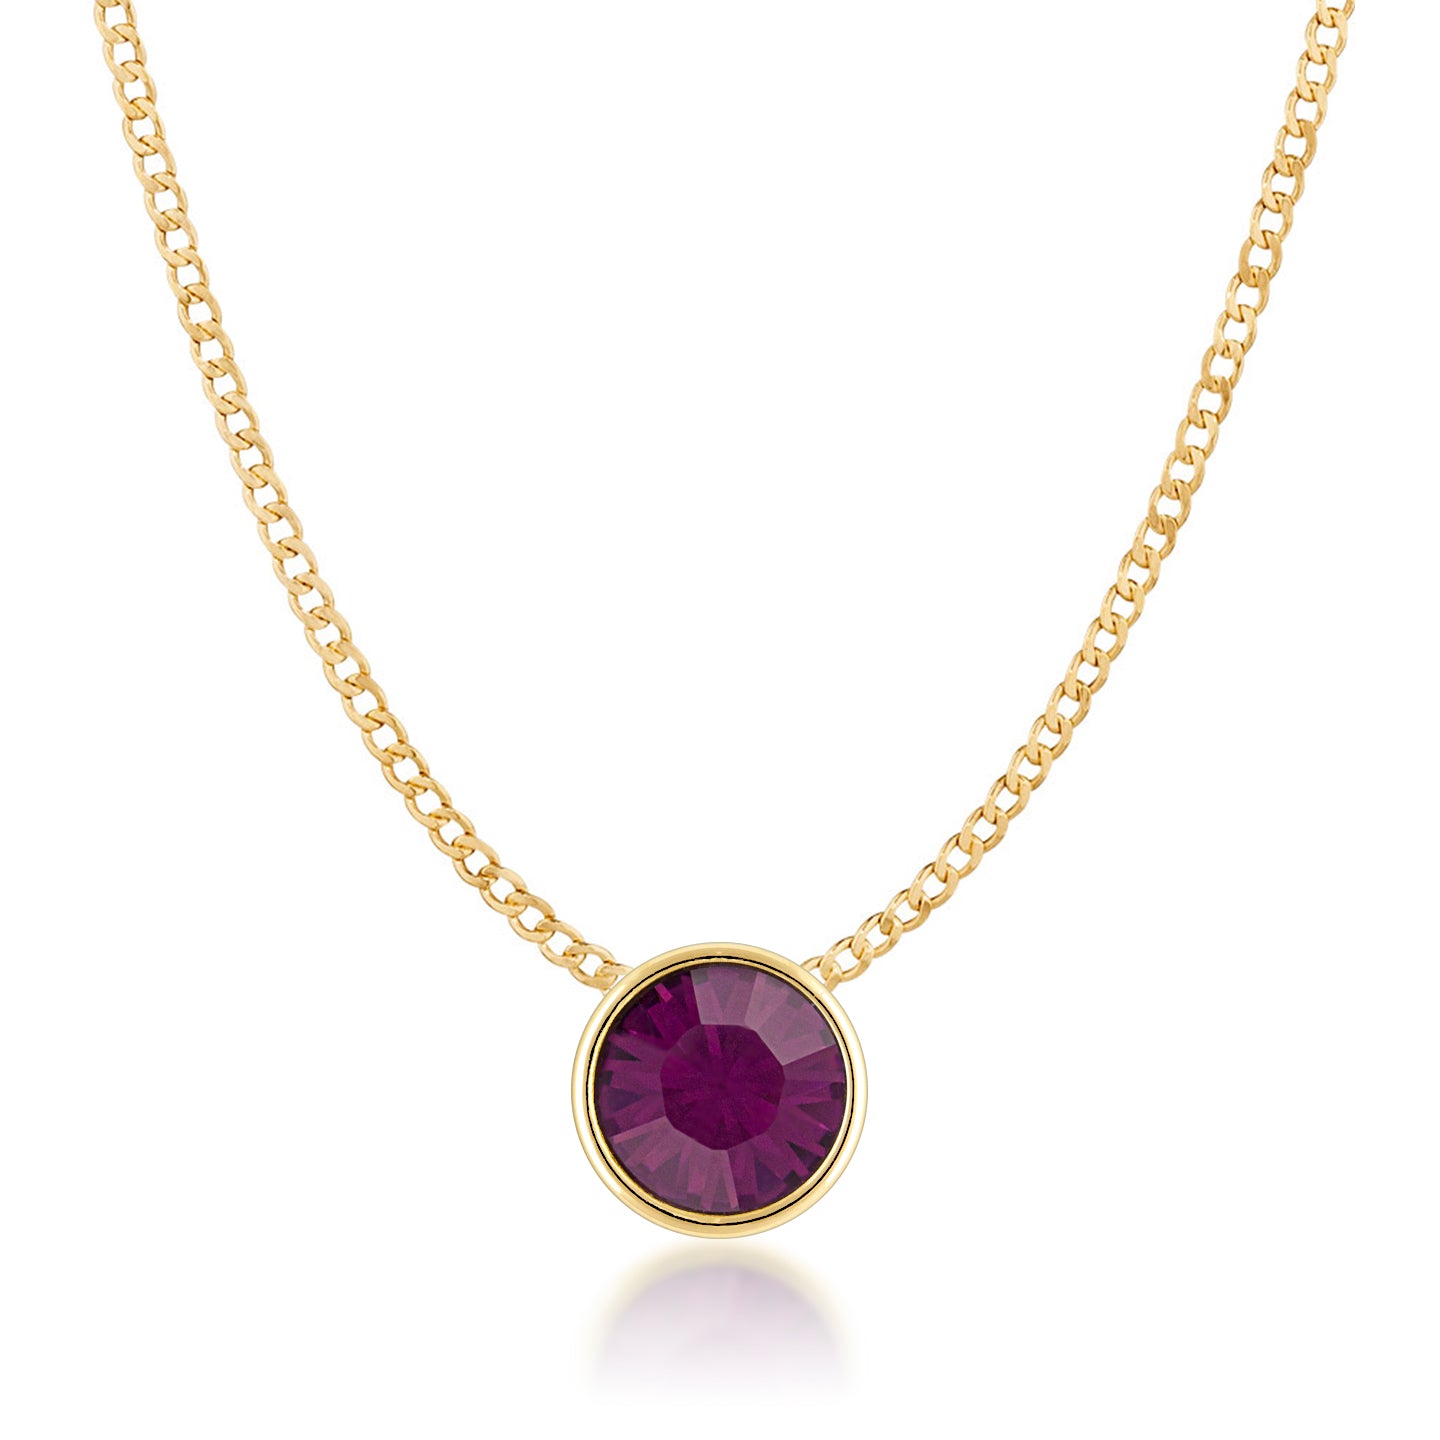 Harley Small Pendant Necklace with Purple Amethyst Round Crystals from Swarovski Gold Plated - Ed Heart